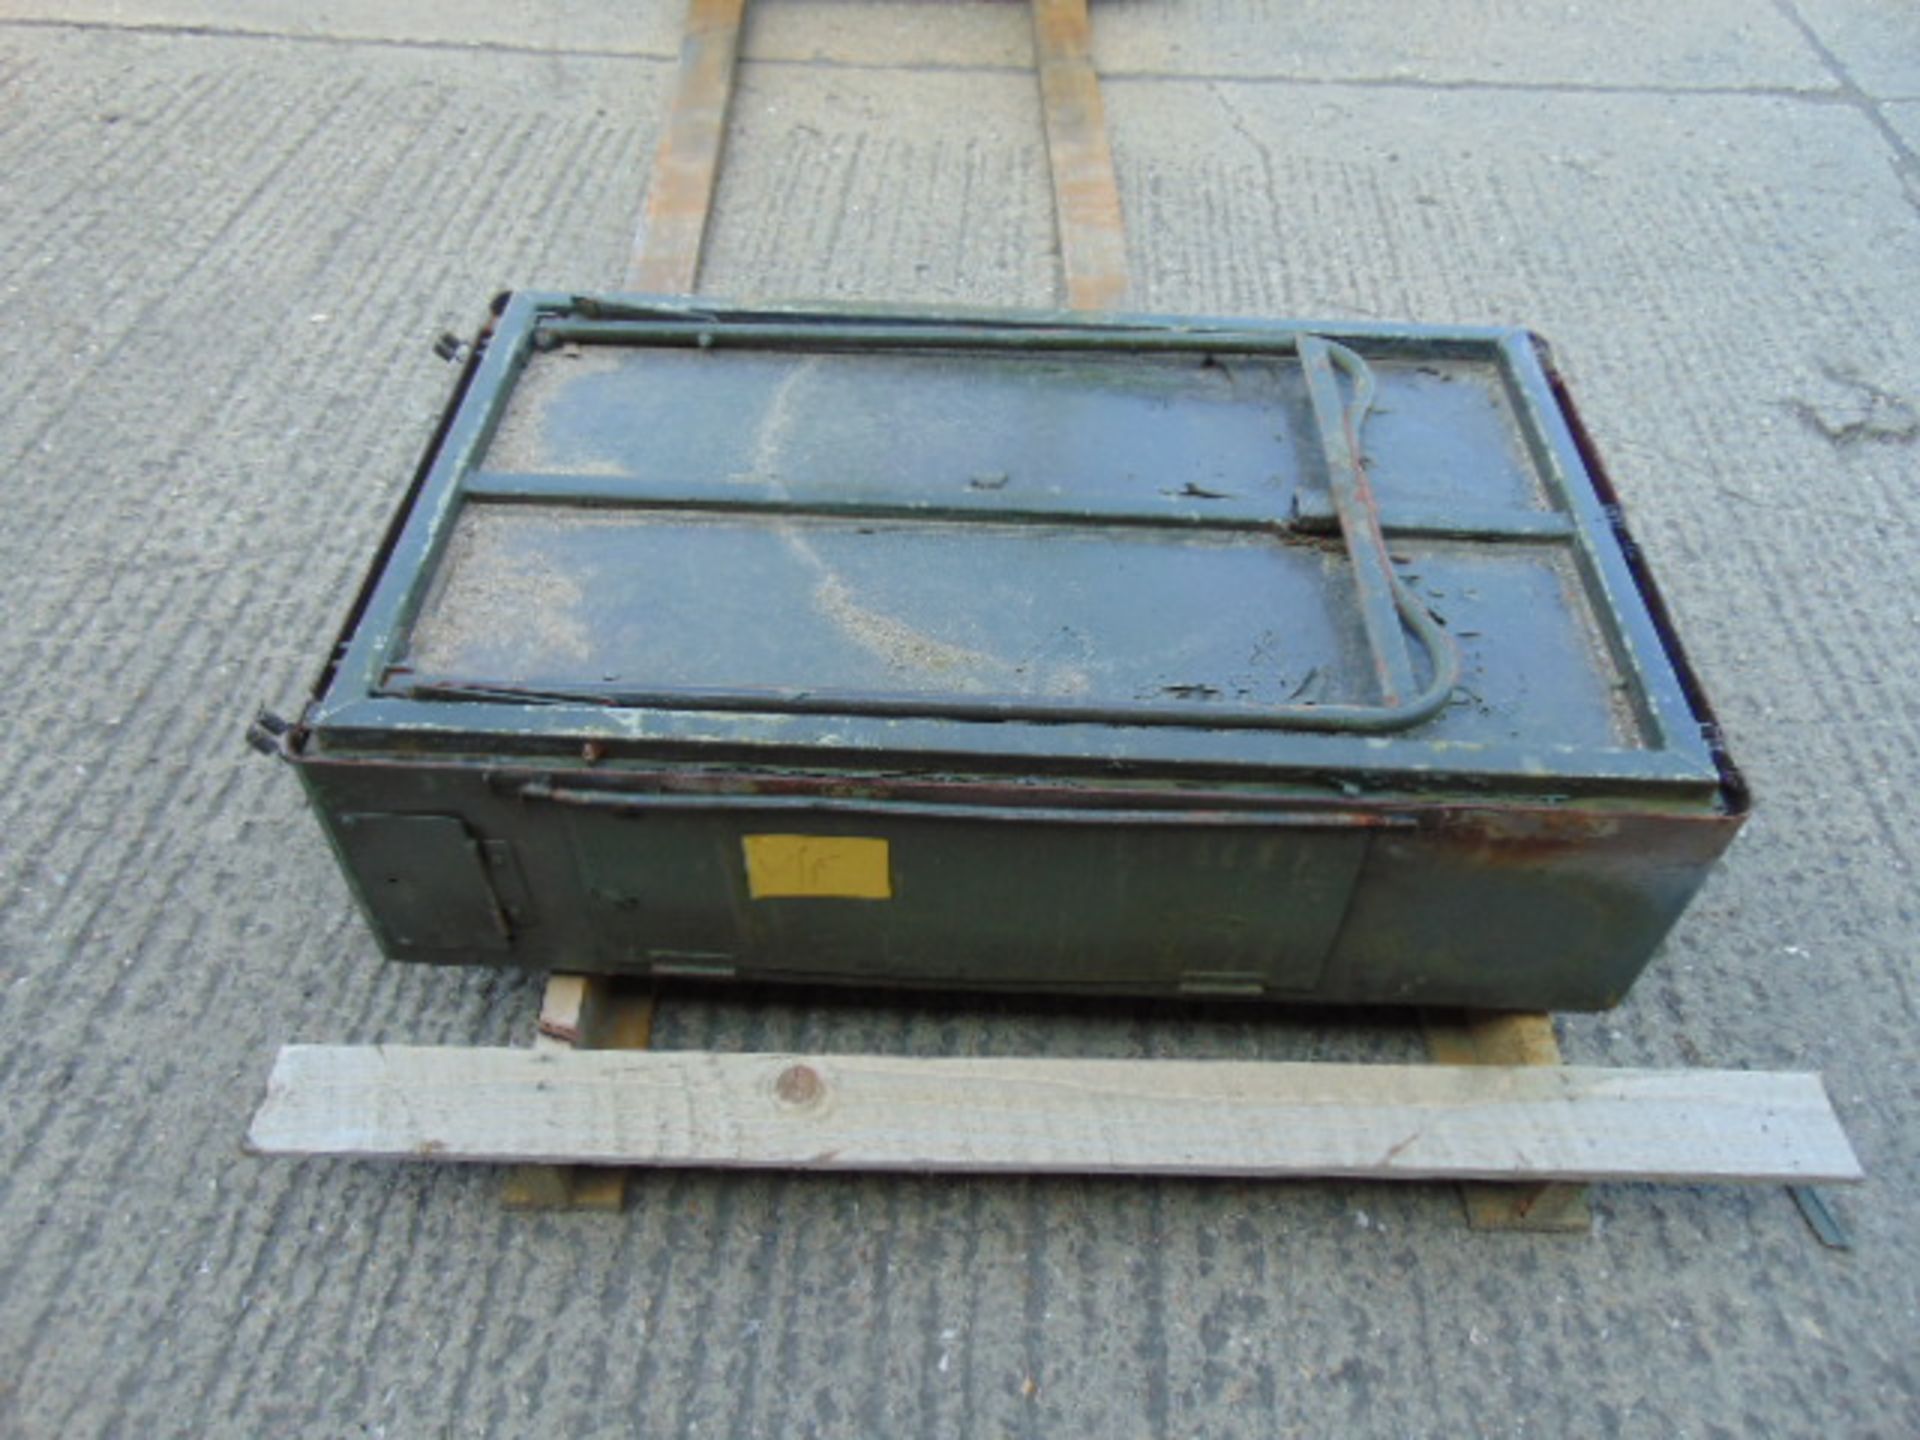 1 x British Army No 5 Field Cooker / Table